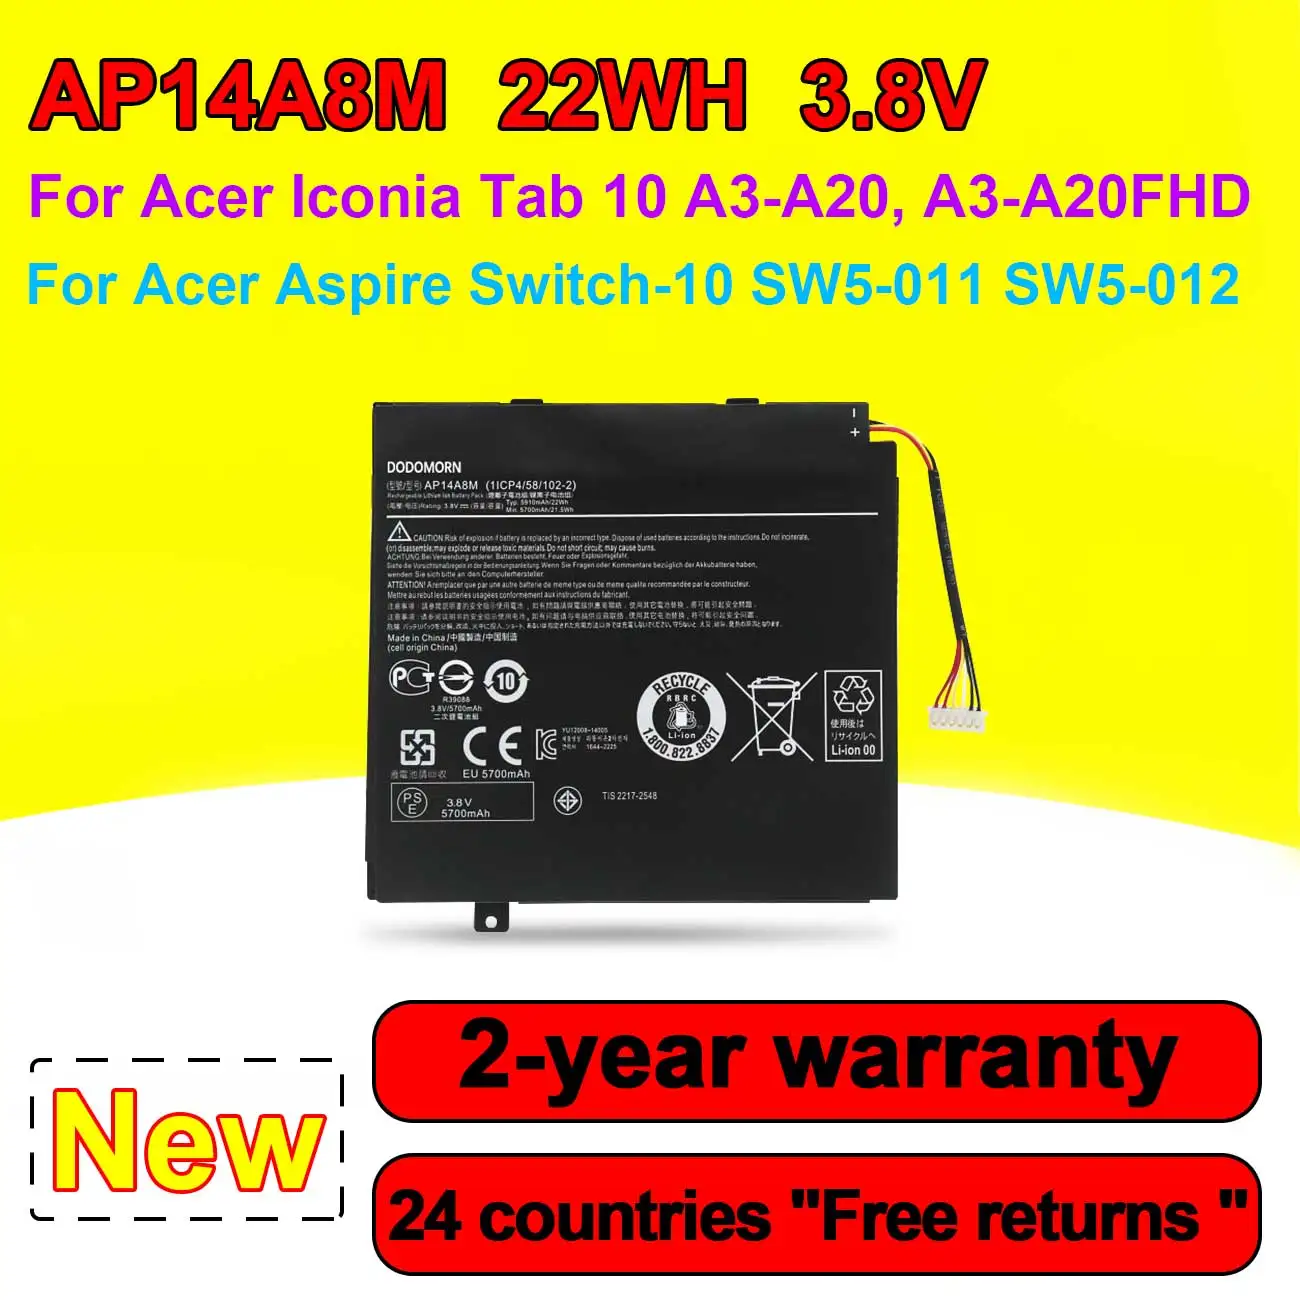 

New AP14A8M Laptop Battery For Acer lcoia Tab 10 A3-A20 A3-A20FHD For Aspire Switch SW5-011 SW5-012 Series 3.8V 22Wh 5910mAh